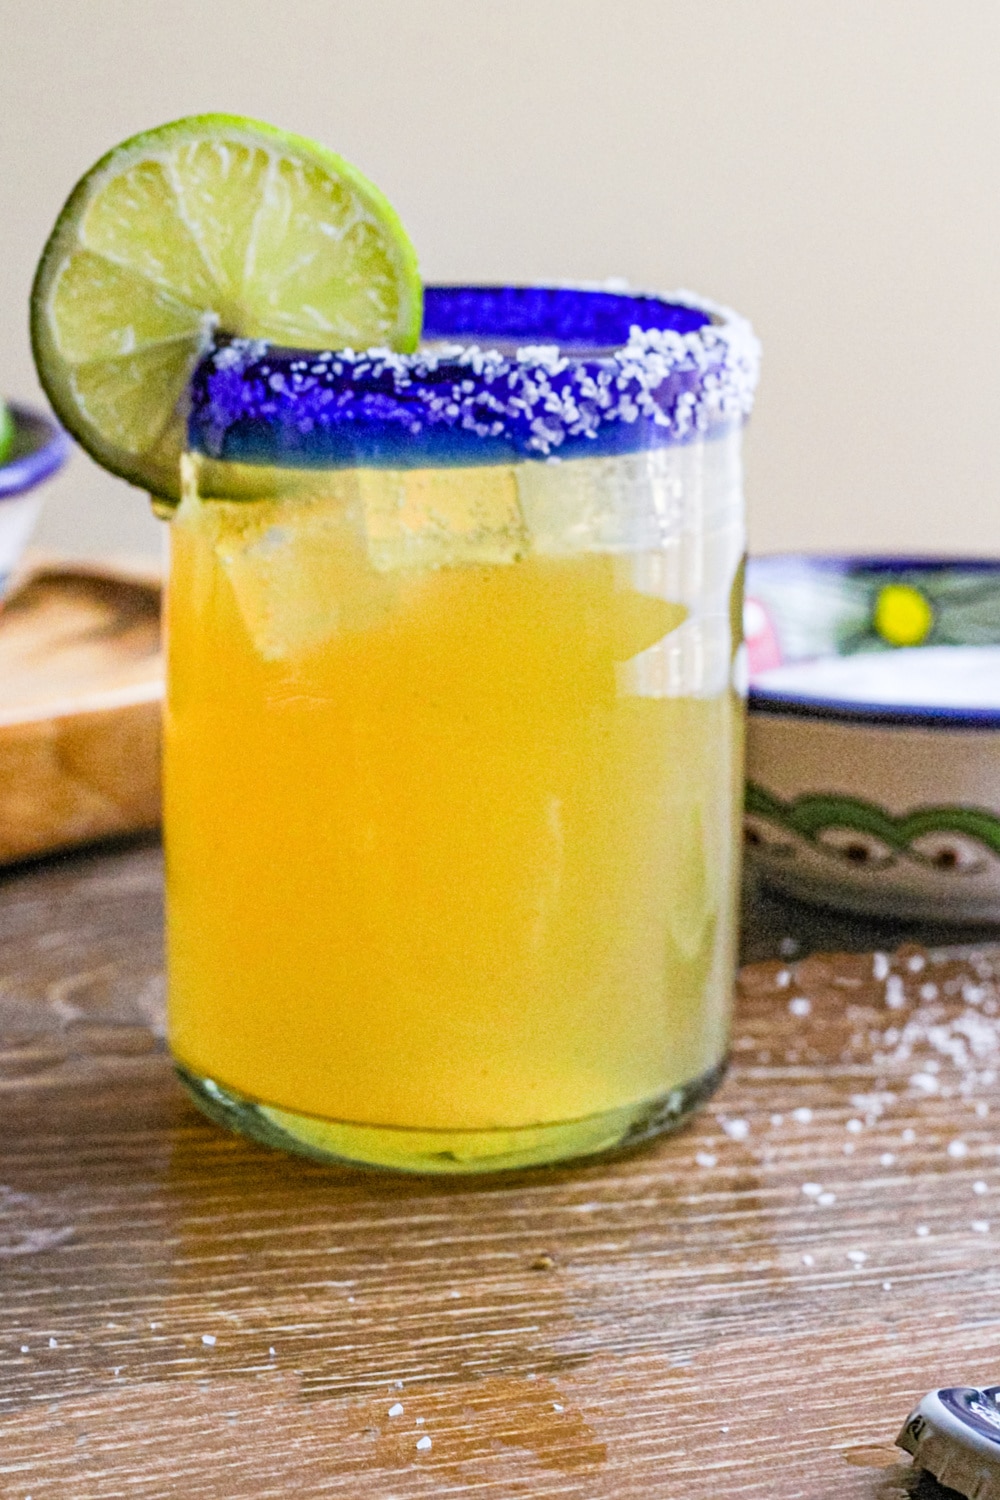 Beer margarita in a clear glass with salt lined rim and garnished with a slice of lime.